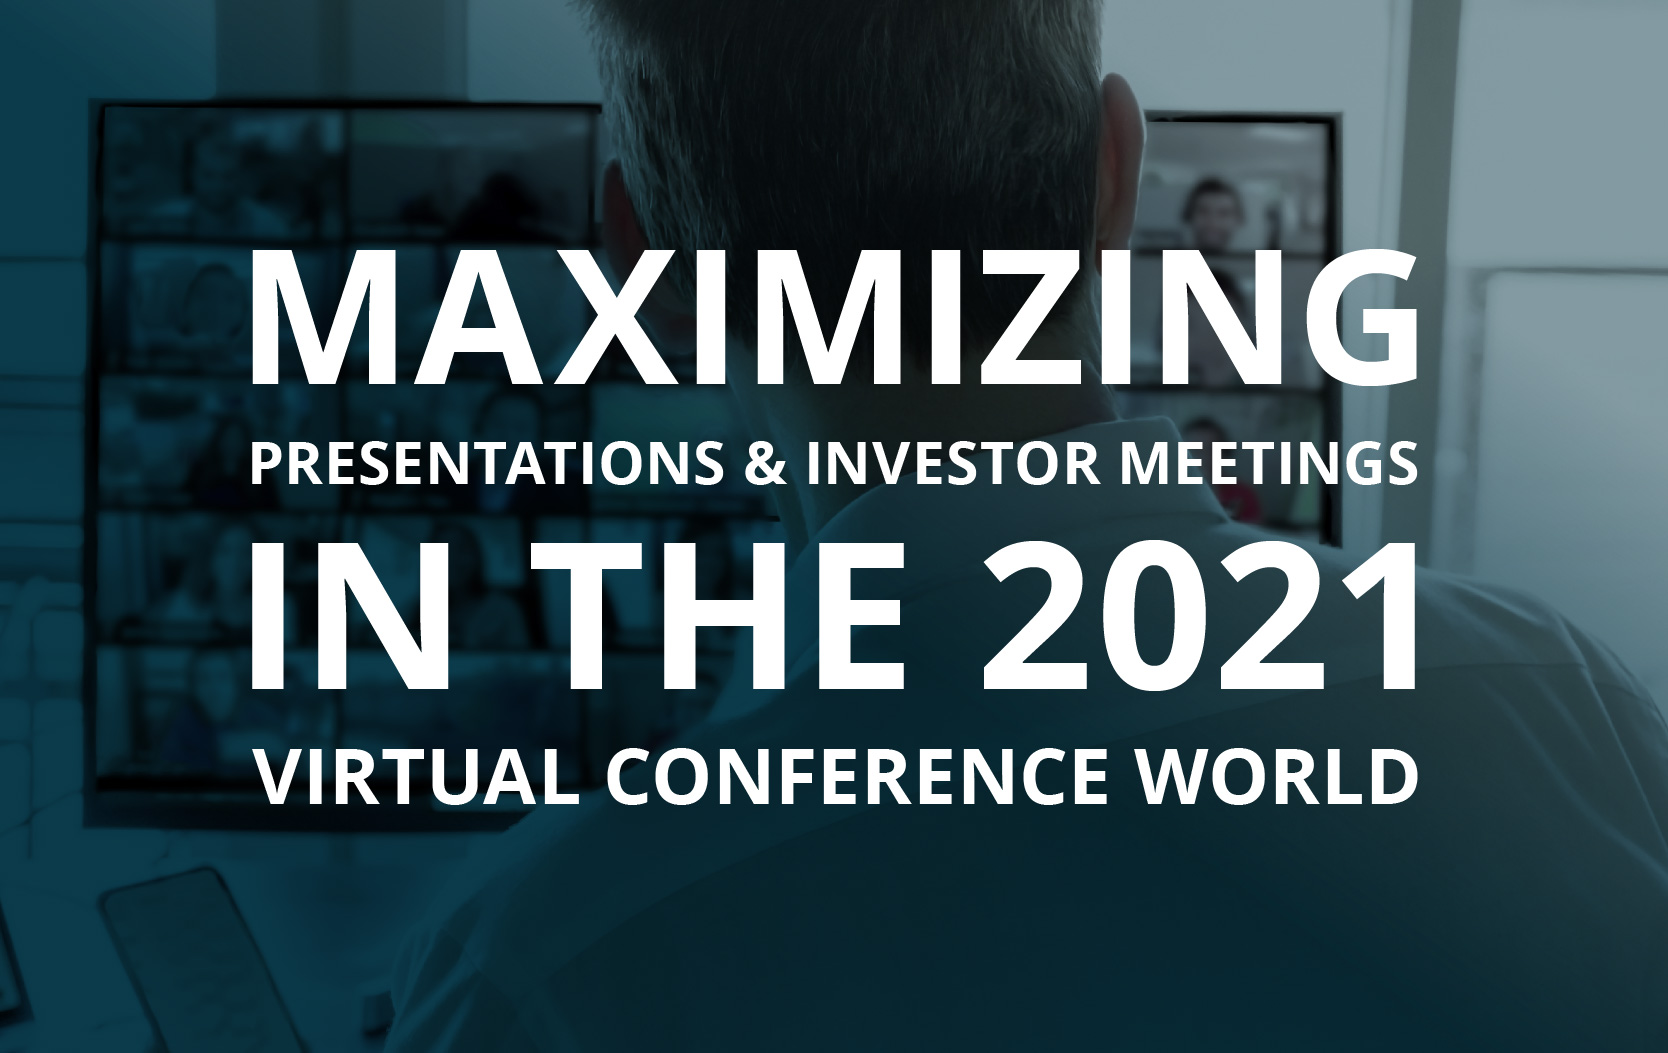 image for Maximizing Presentations & Investor Meetings in the 2021 Virtual Conference World